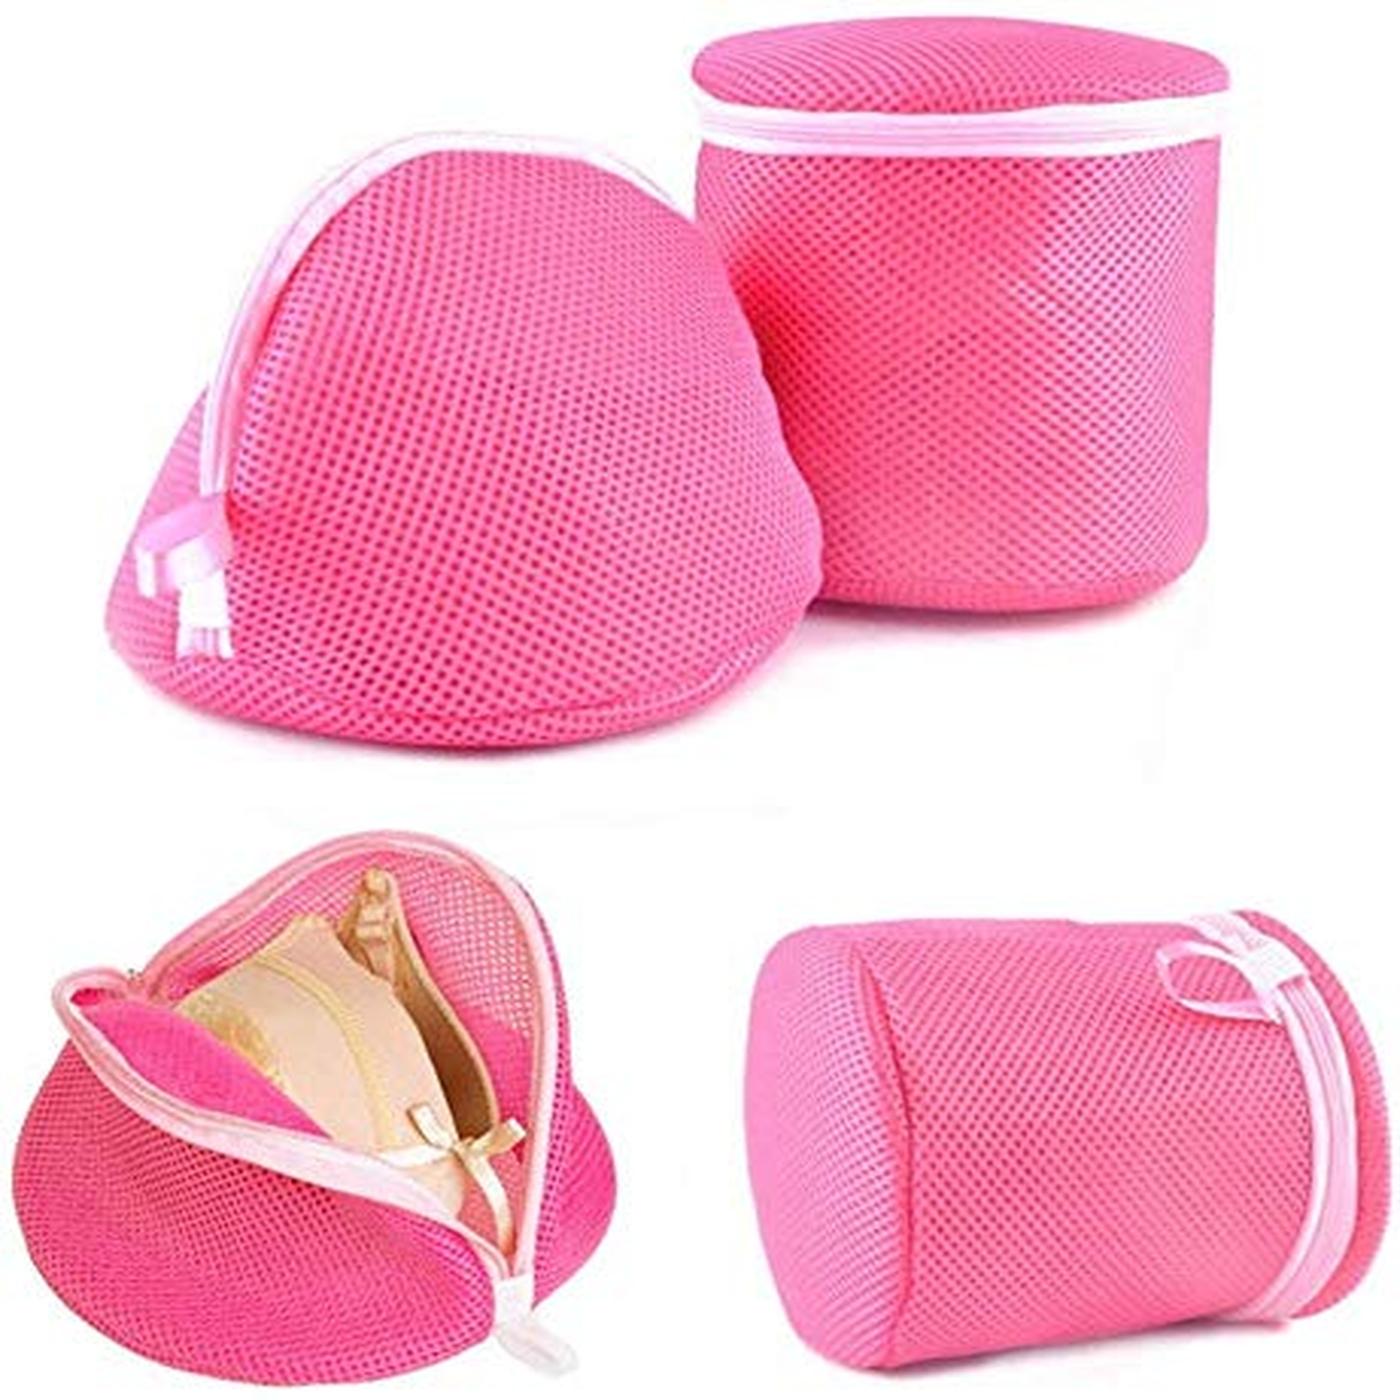 Silicone Bra Laundry Bag Bra Washing Bag Travel Reusable Cleaning Home  Silicone Lingerie Bag Wash Bag for Towel Scarf Clothes Pink 